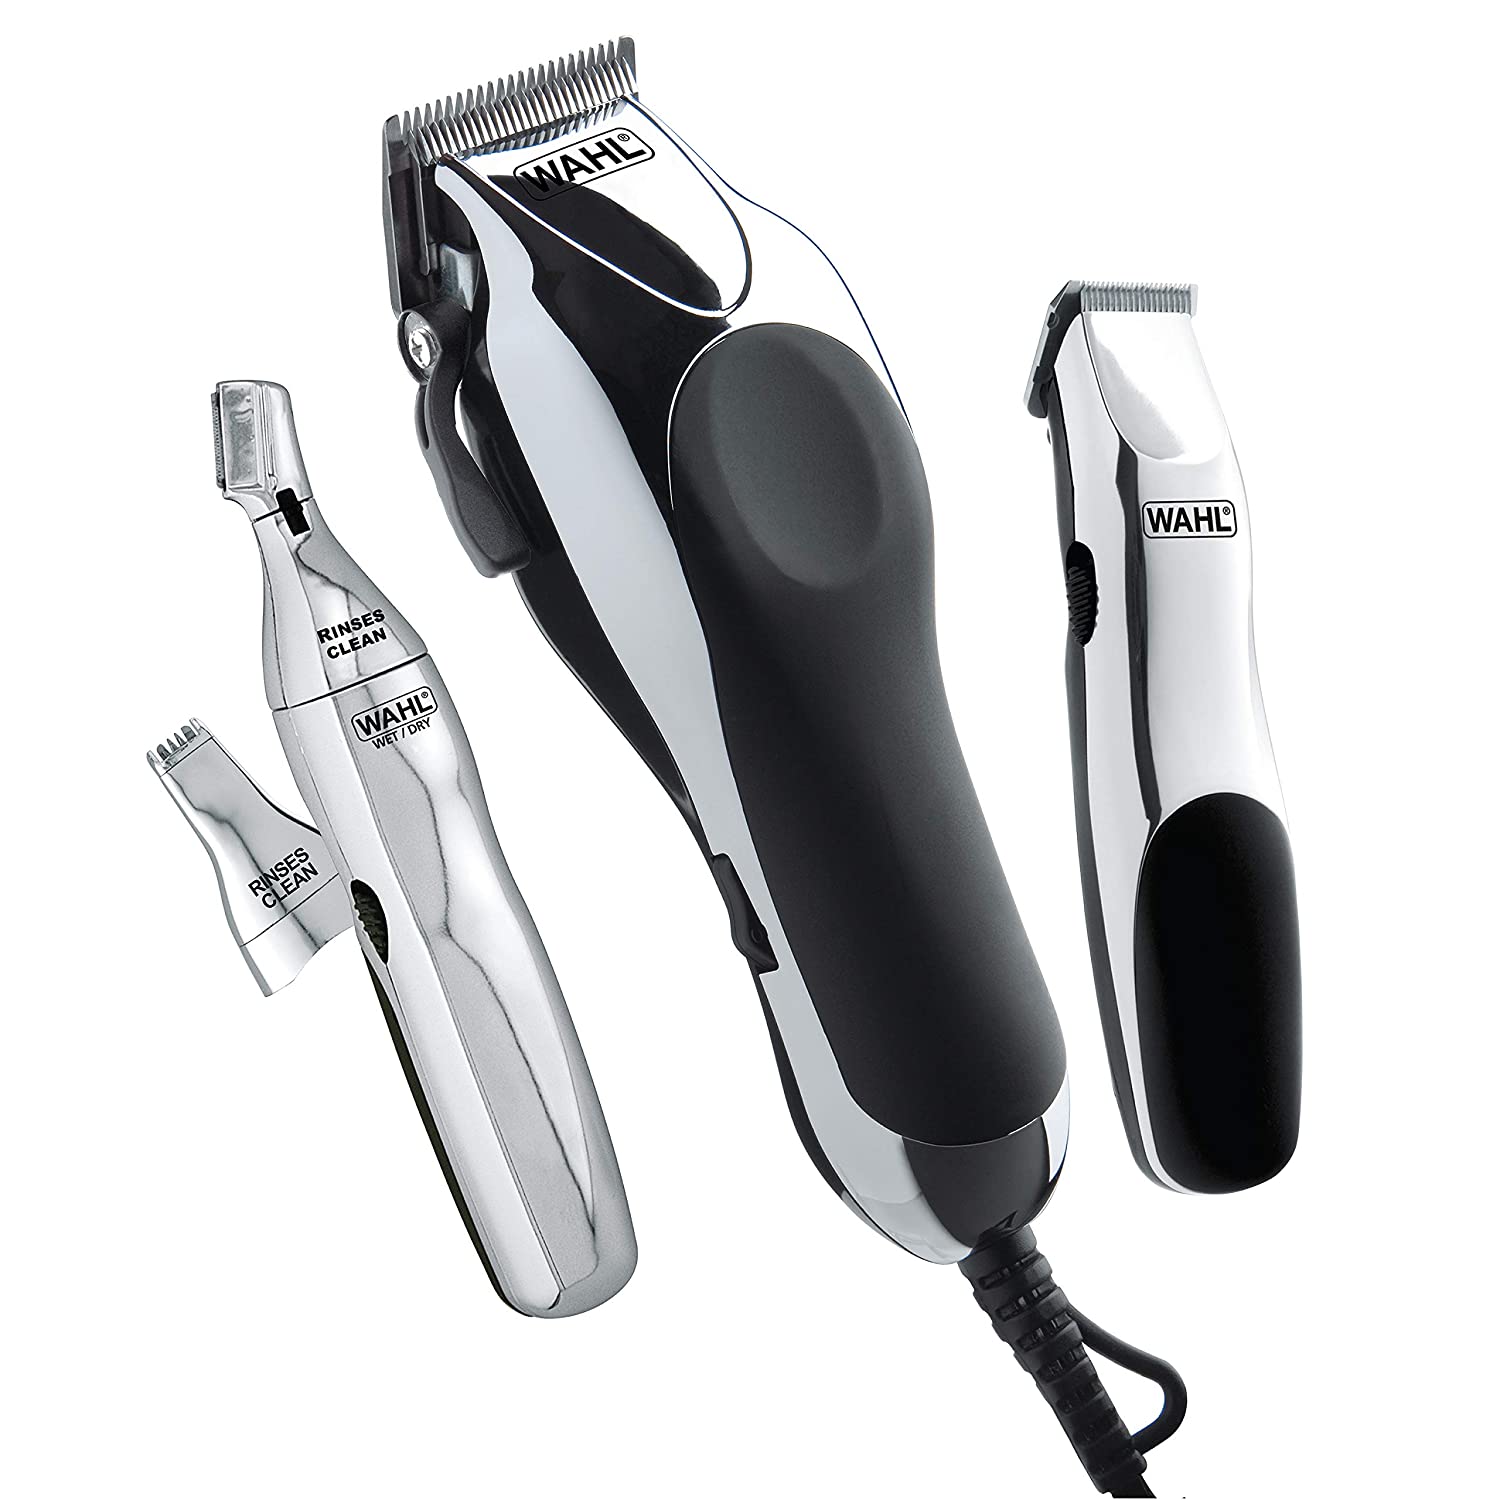 WAHL Hair Clippers 79524